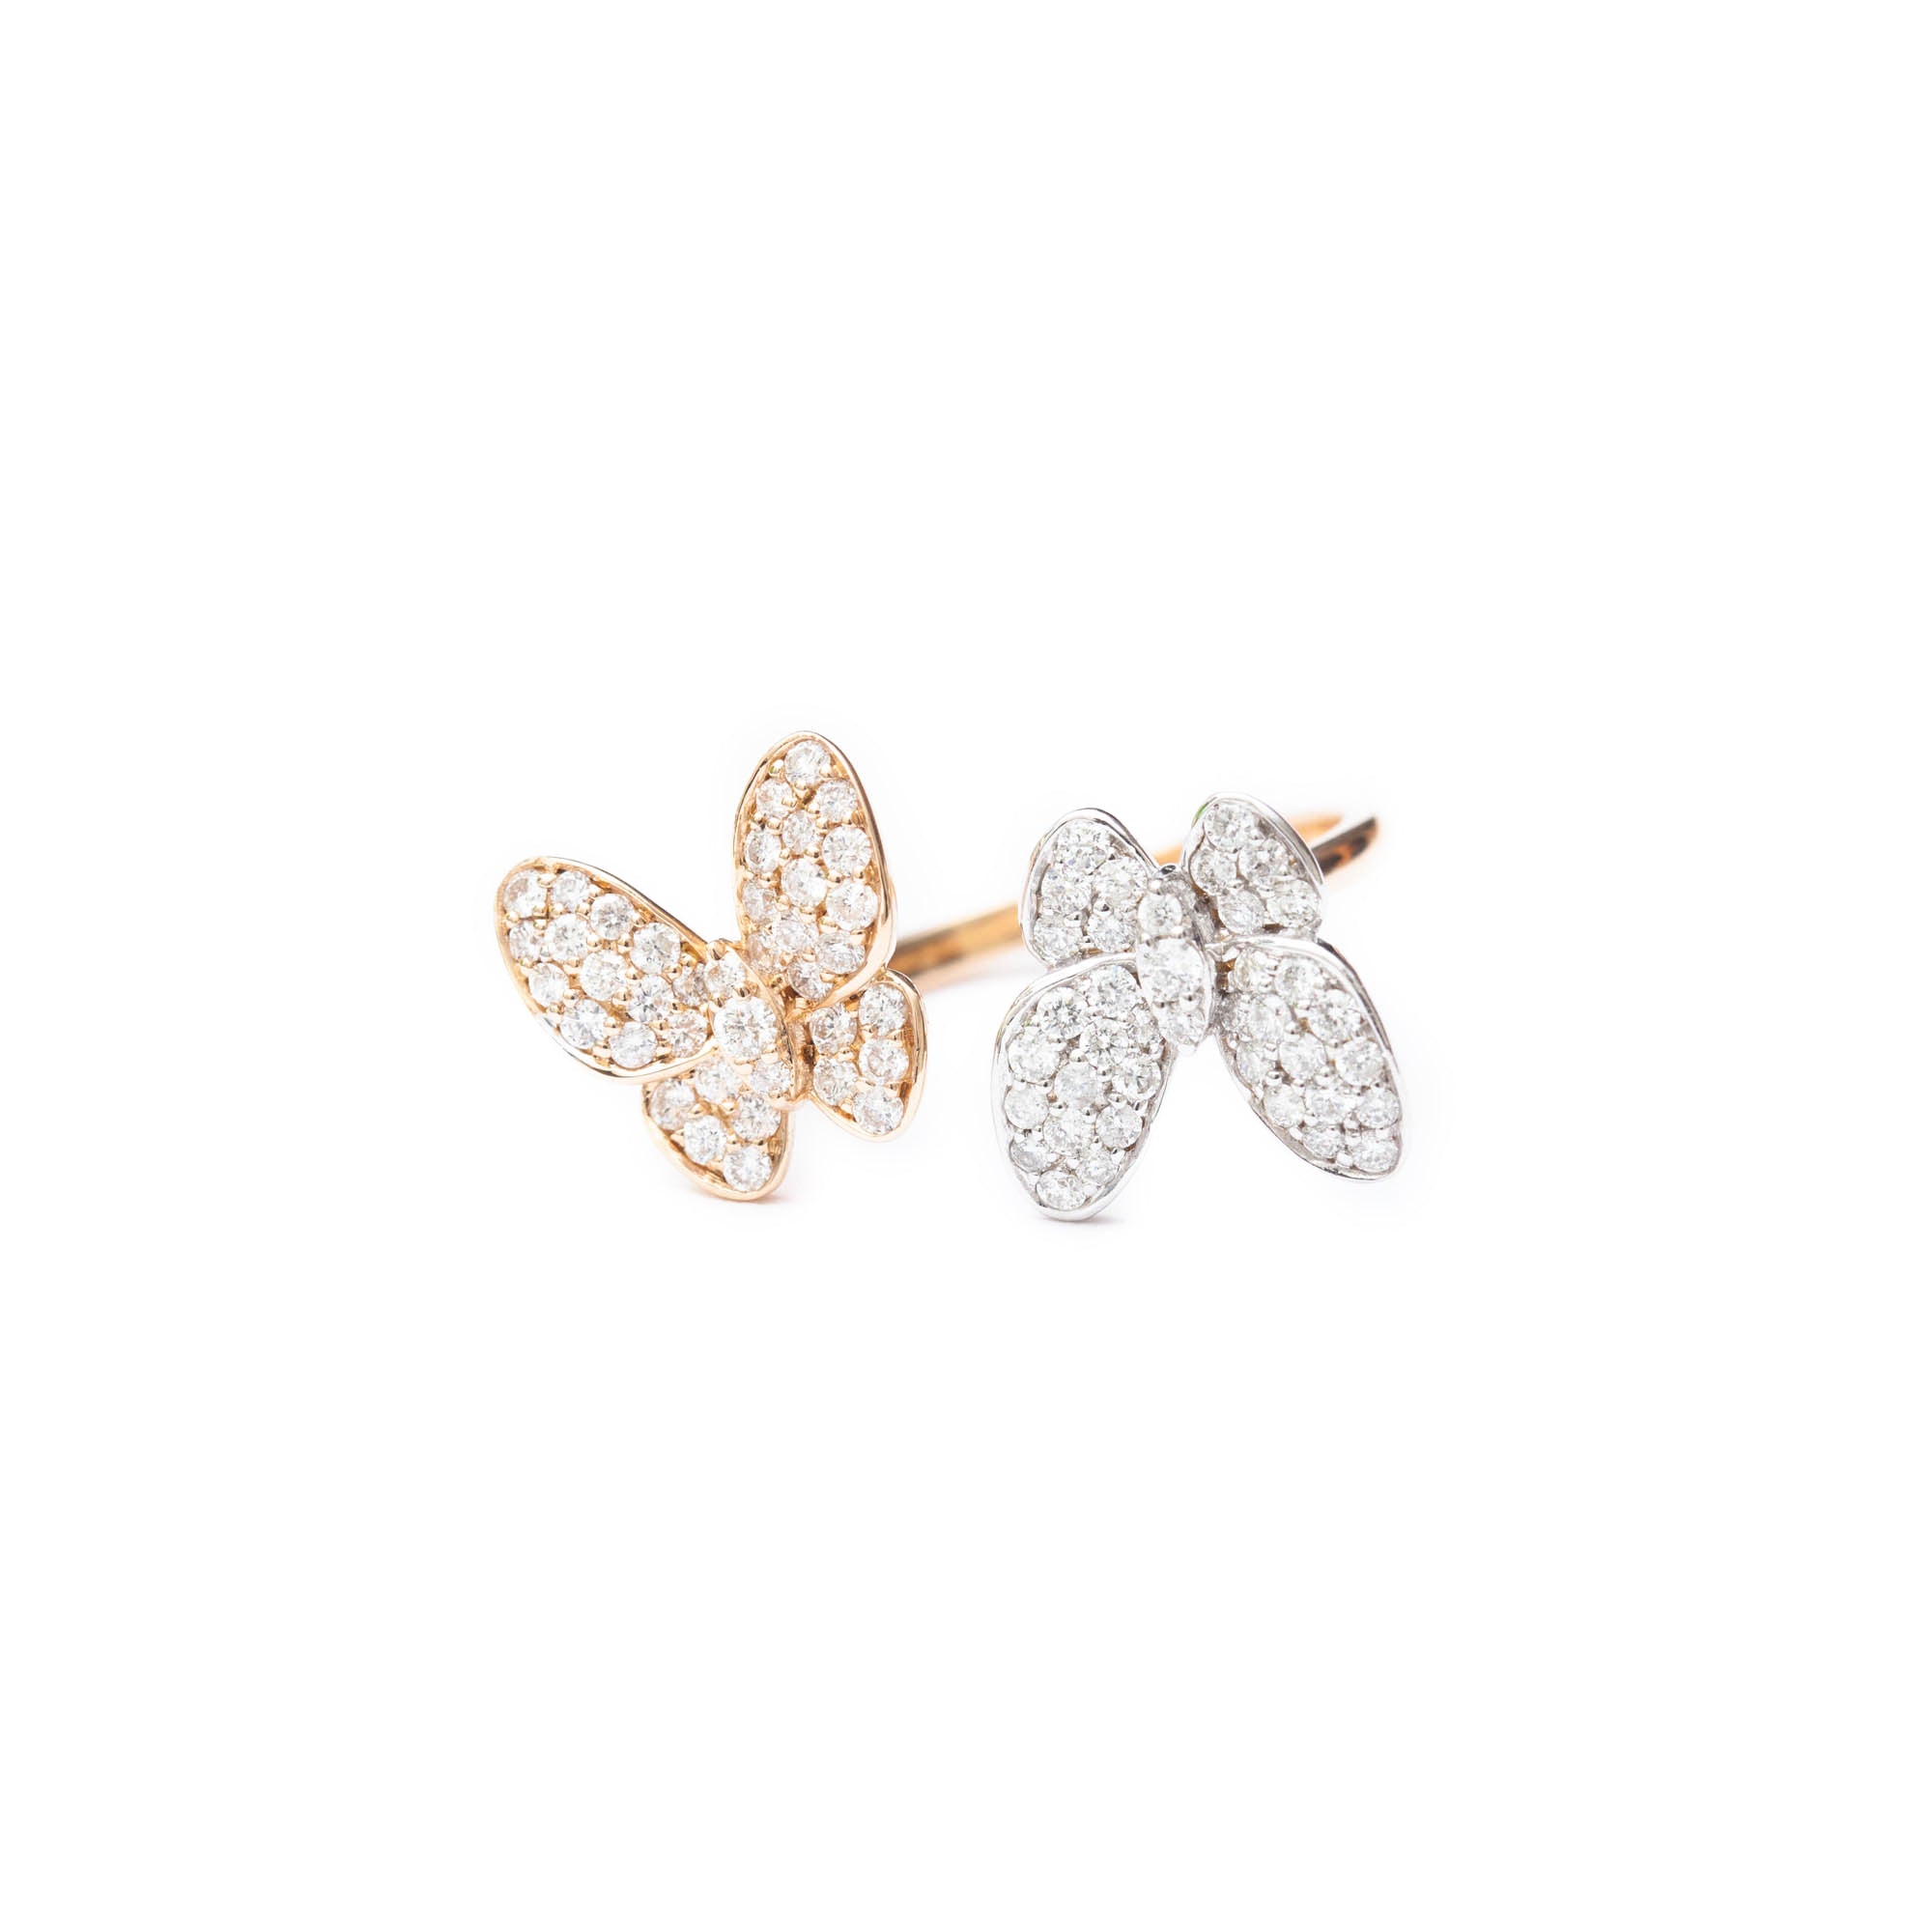 Butterfly Kisses Ring